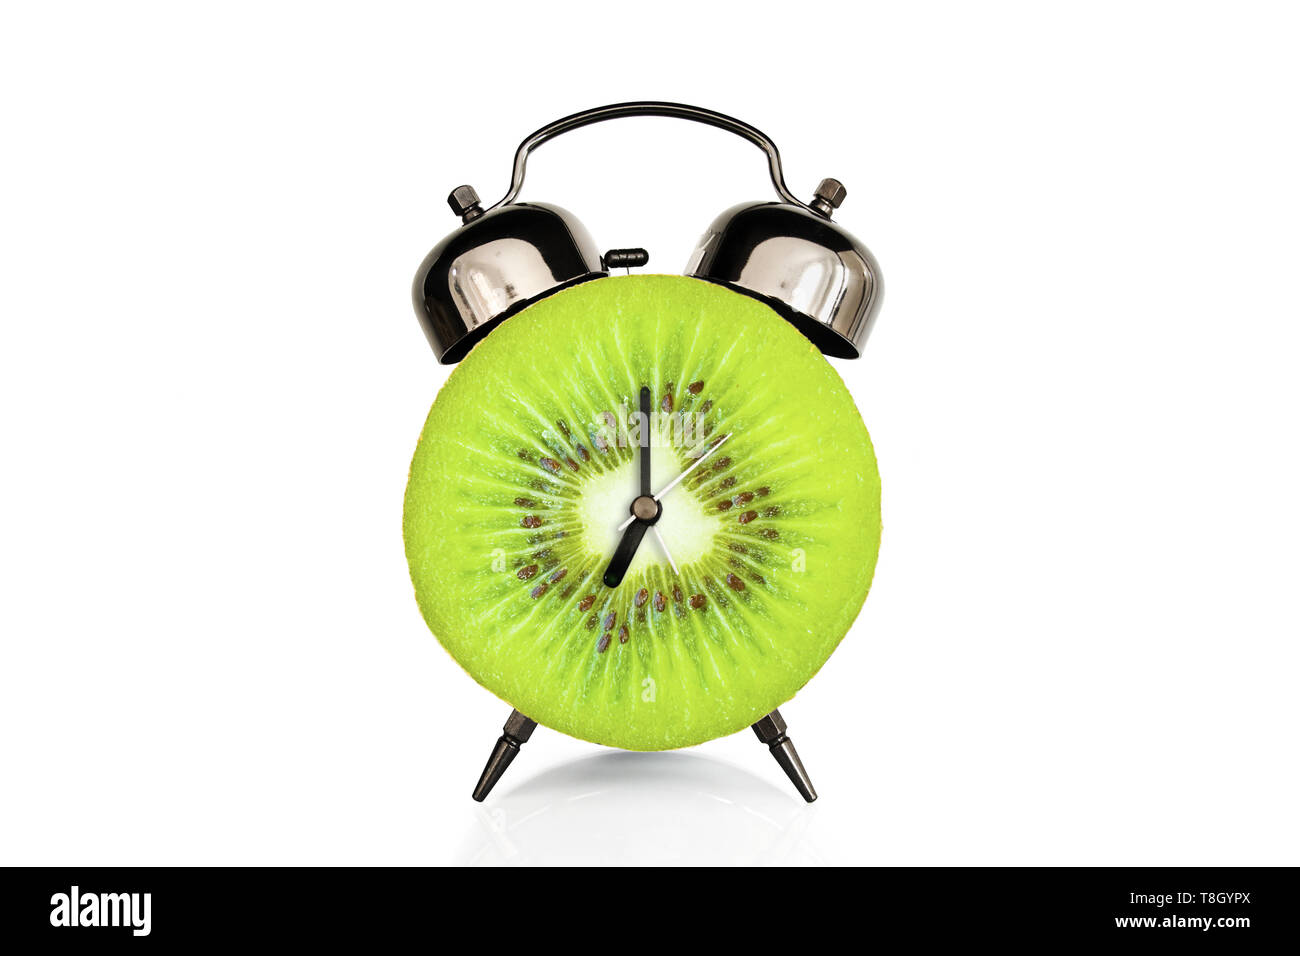 Kiwi slice on alarm clock, isolated on white background, fruit and vitamins diet at breakfast nutrition concept Stock Photo